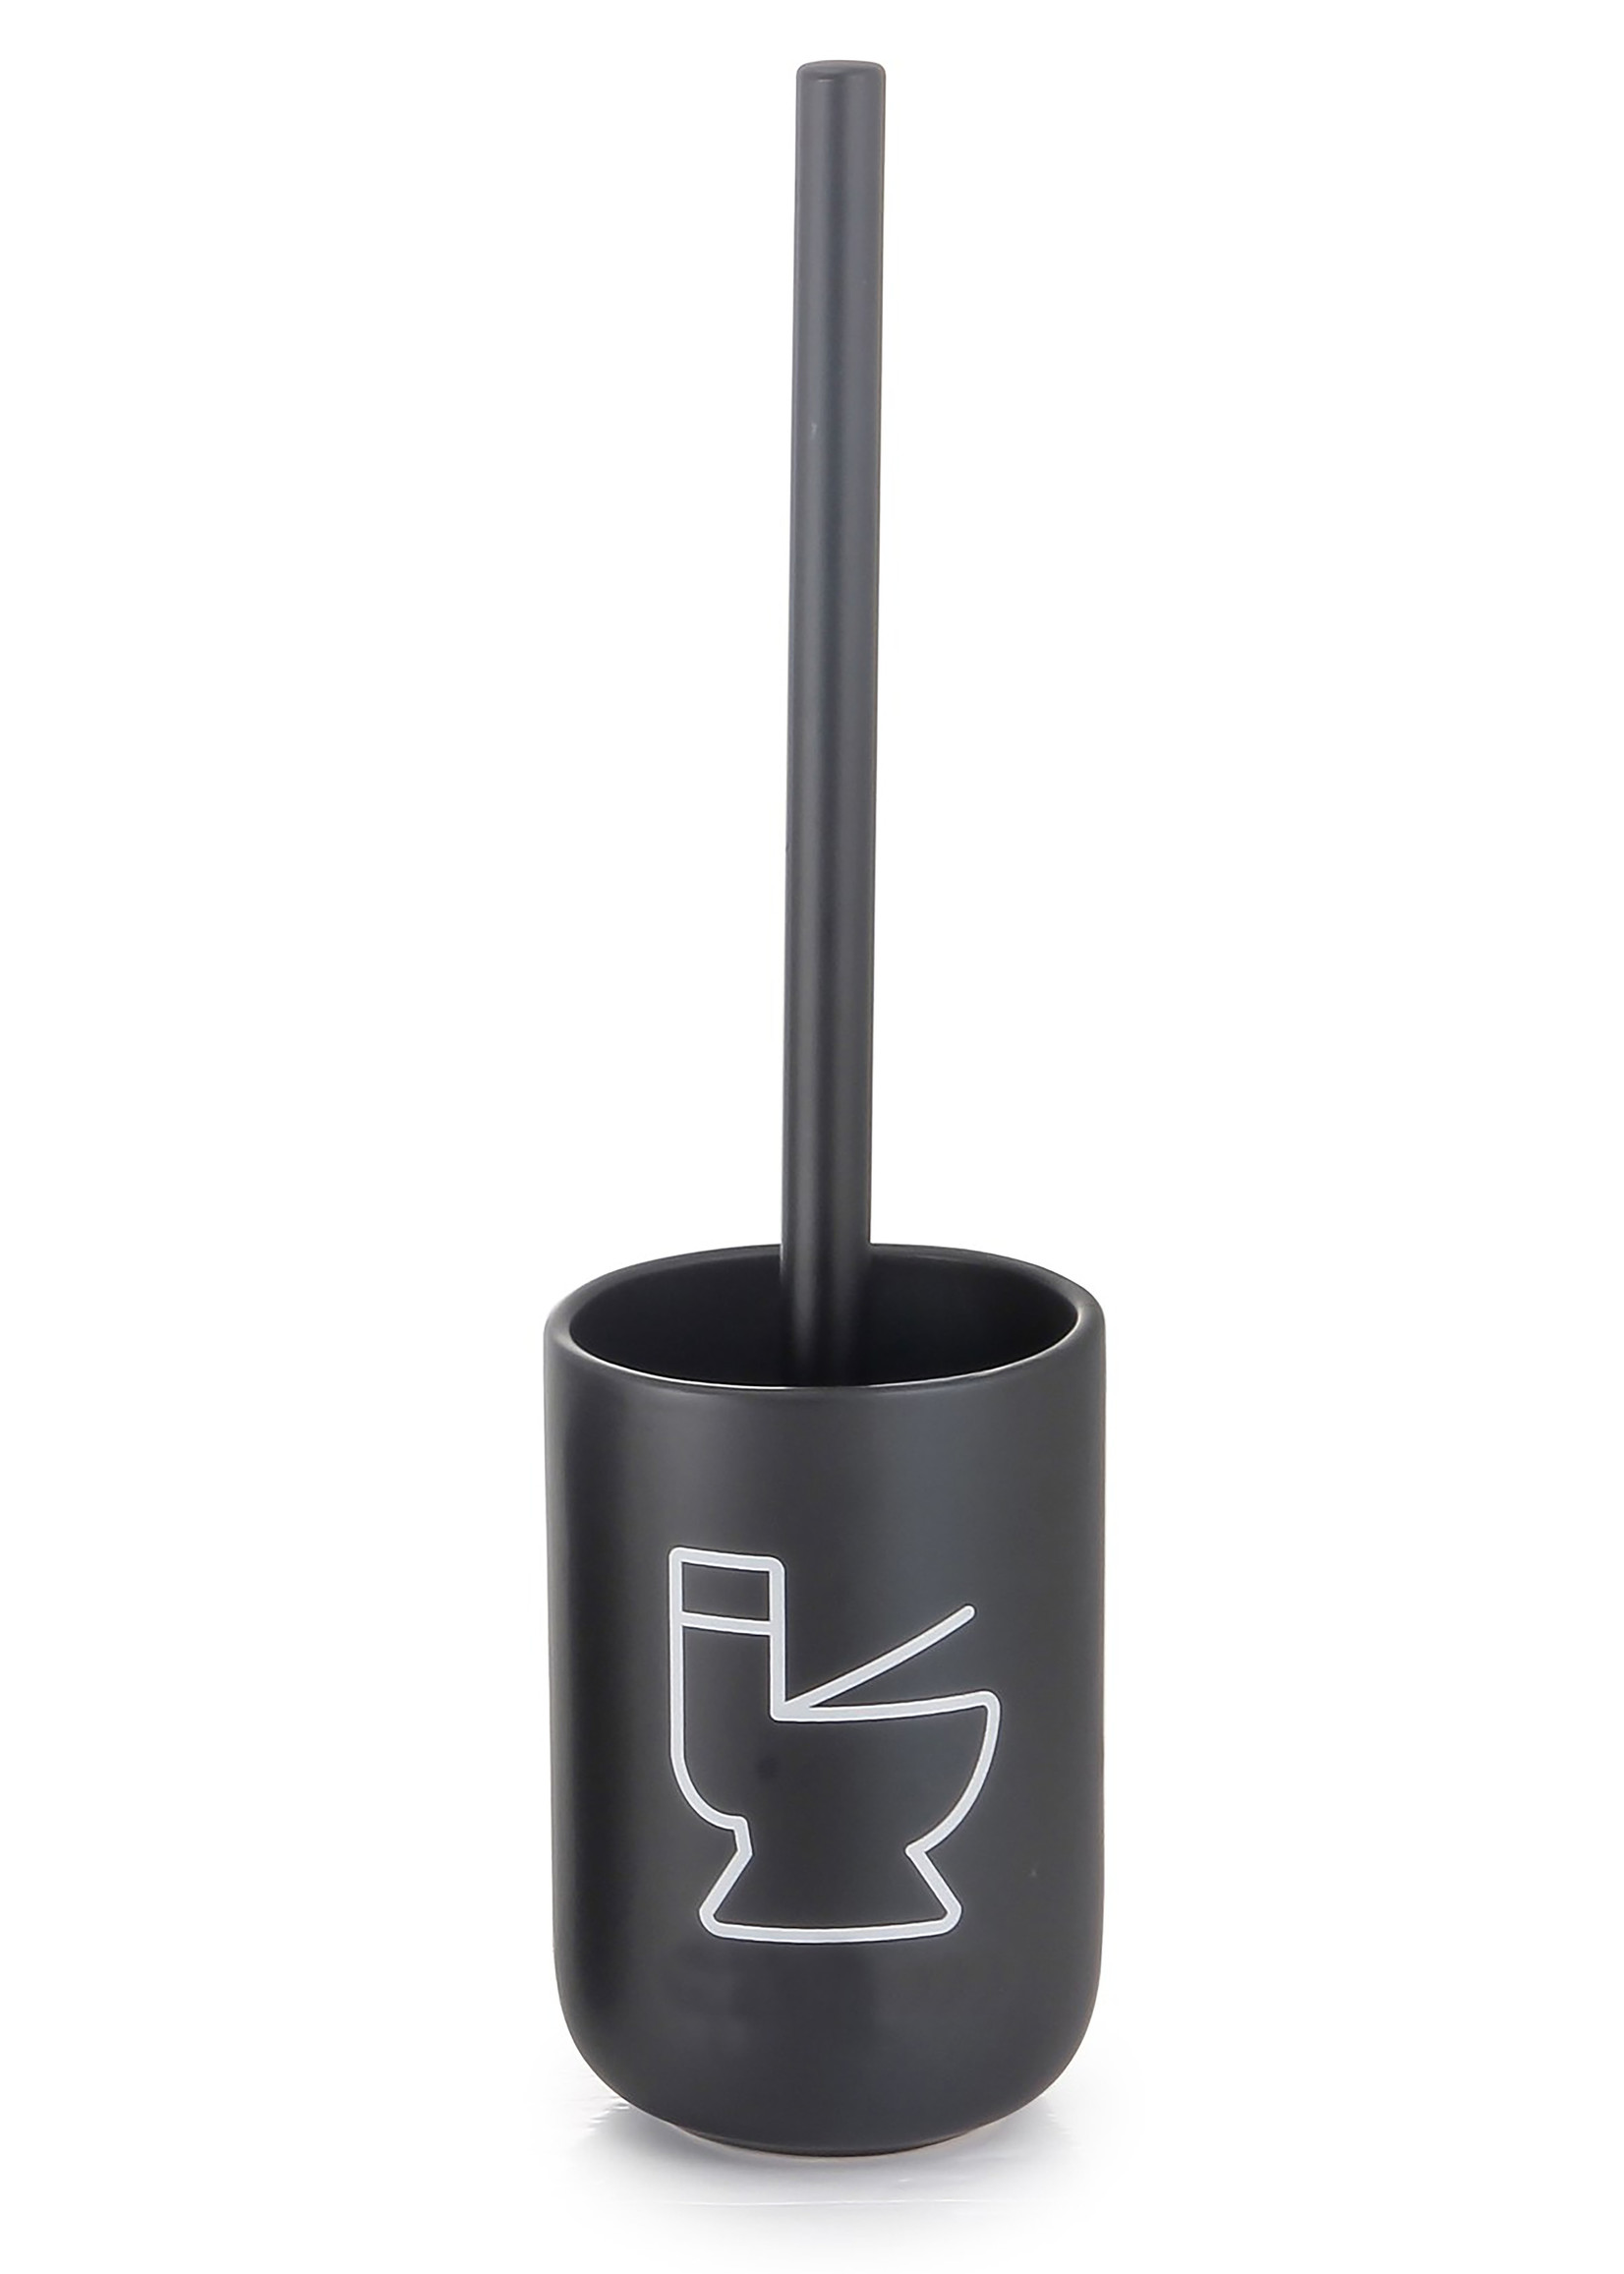 ITY INTERNATIONAL Ceramic Toilet Brush with Decal